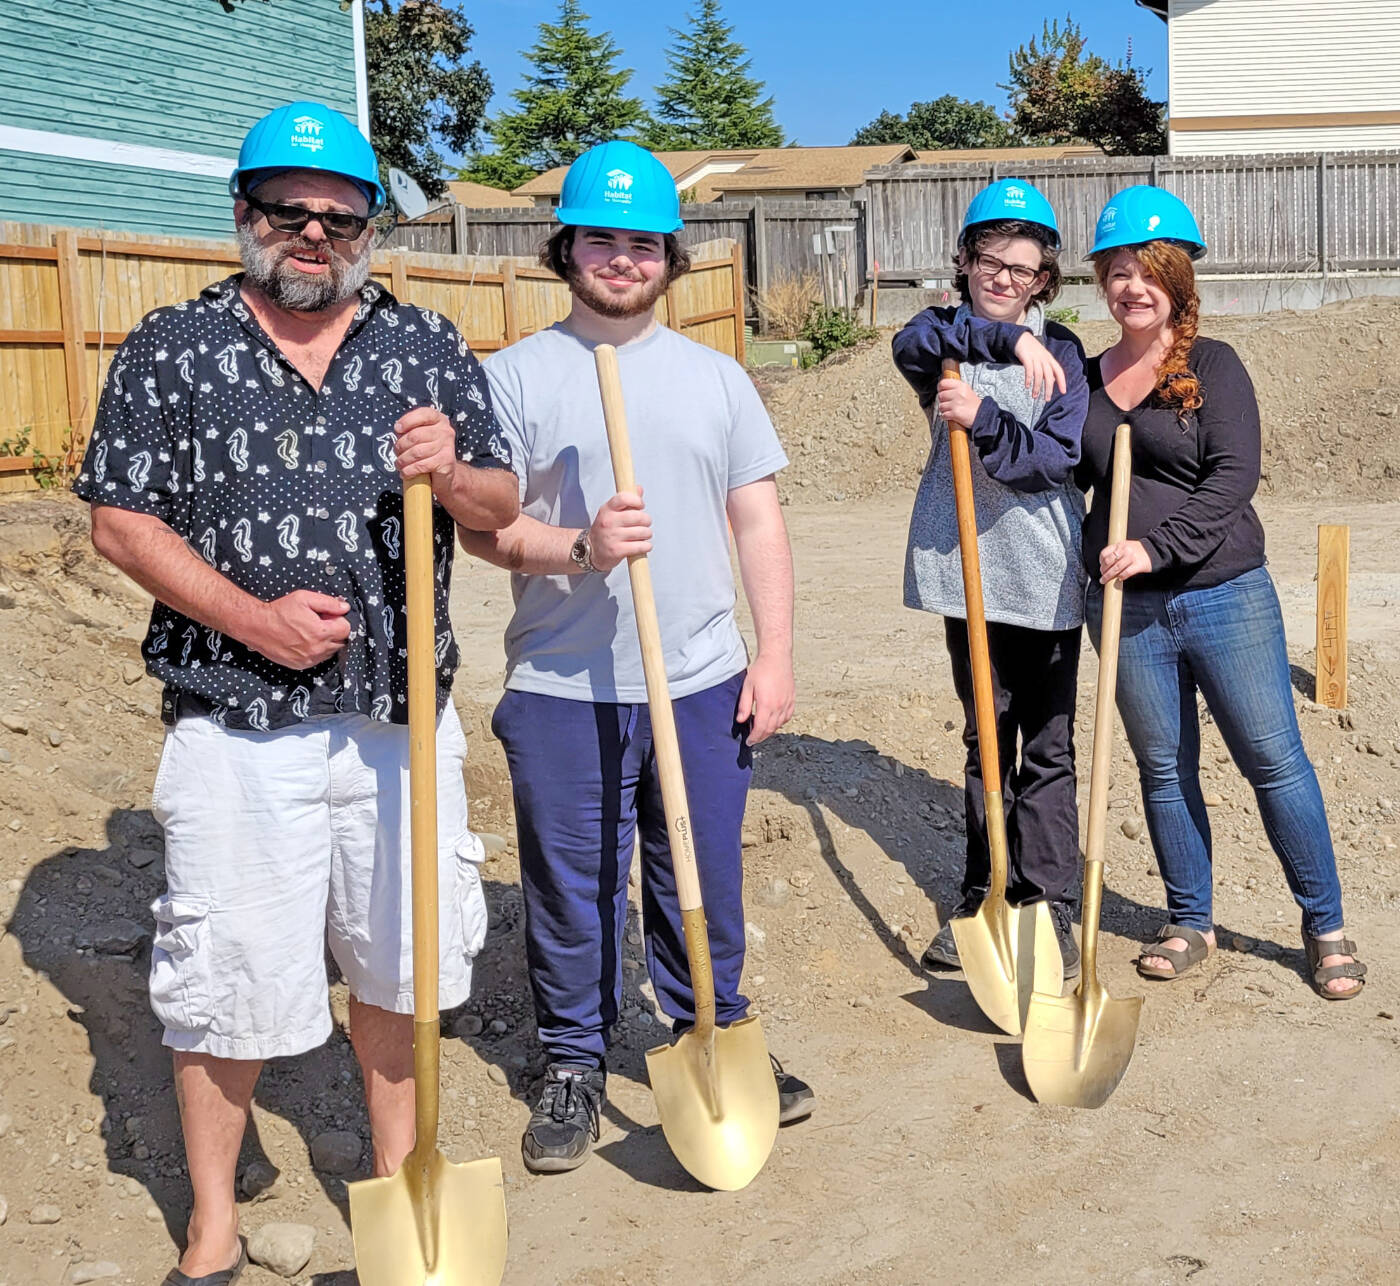 The family breaks ground on their new home with room for everyone.